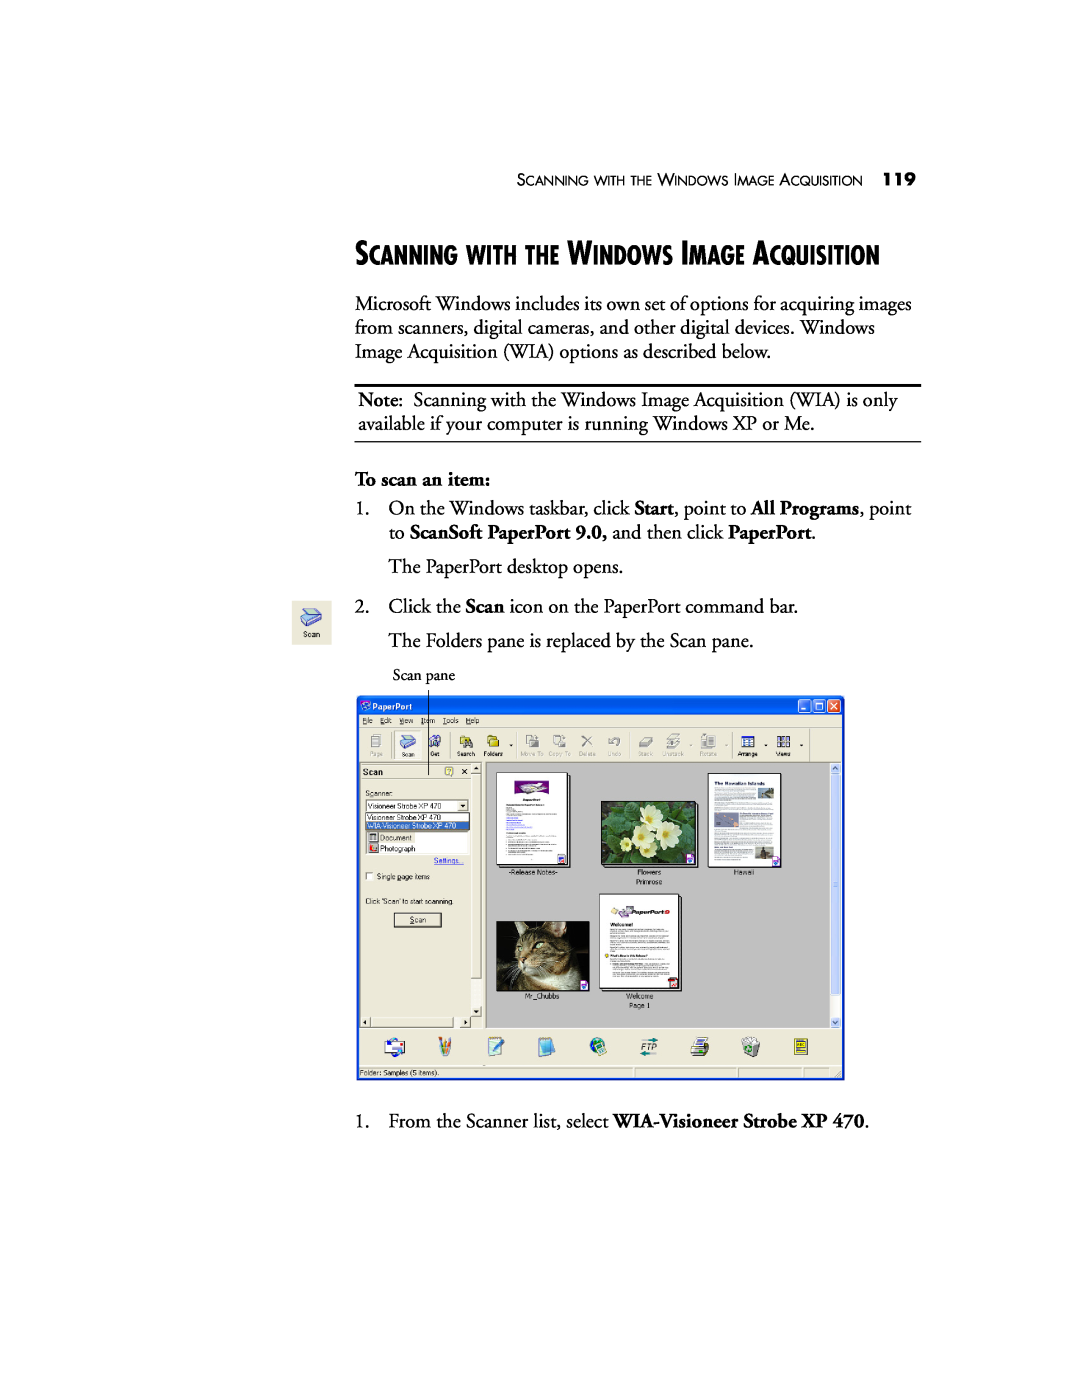 Visioneer XP 470 manual Scanning With The Windows Image Acquisition, To scan an item 